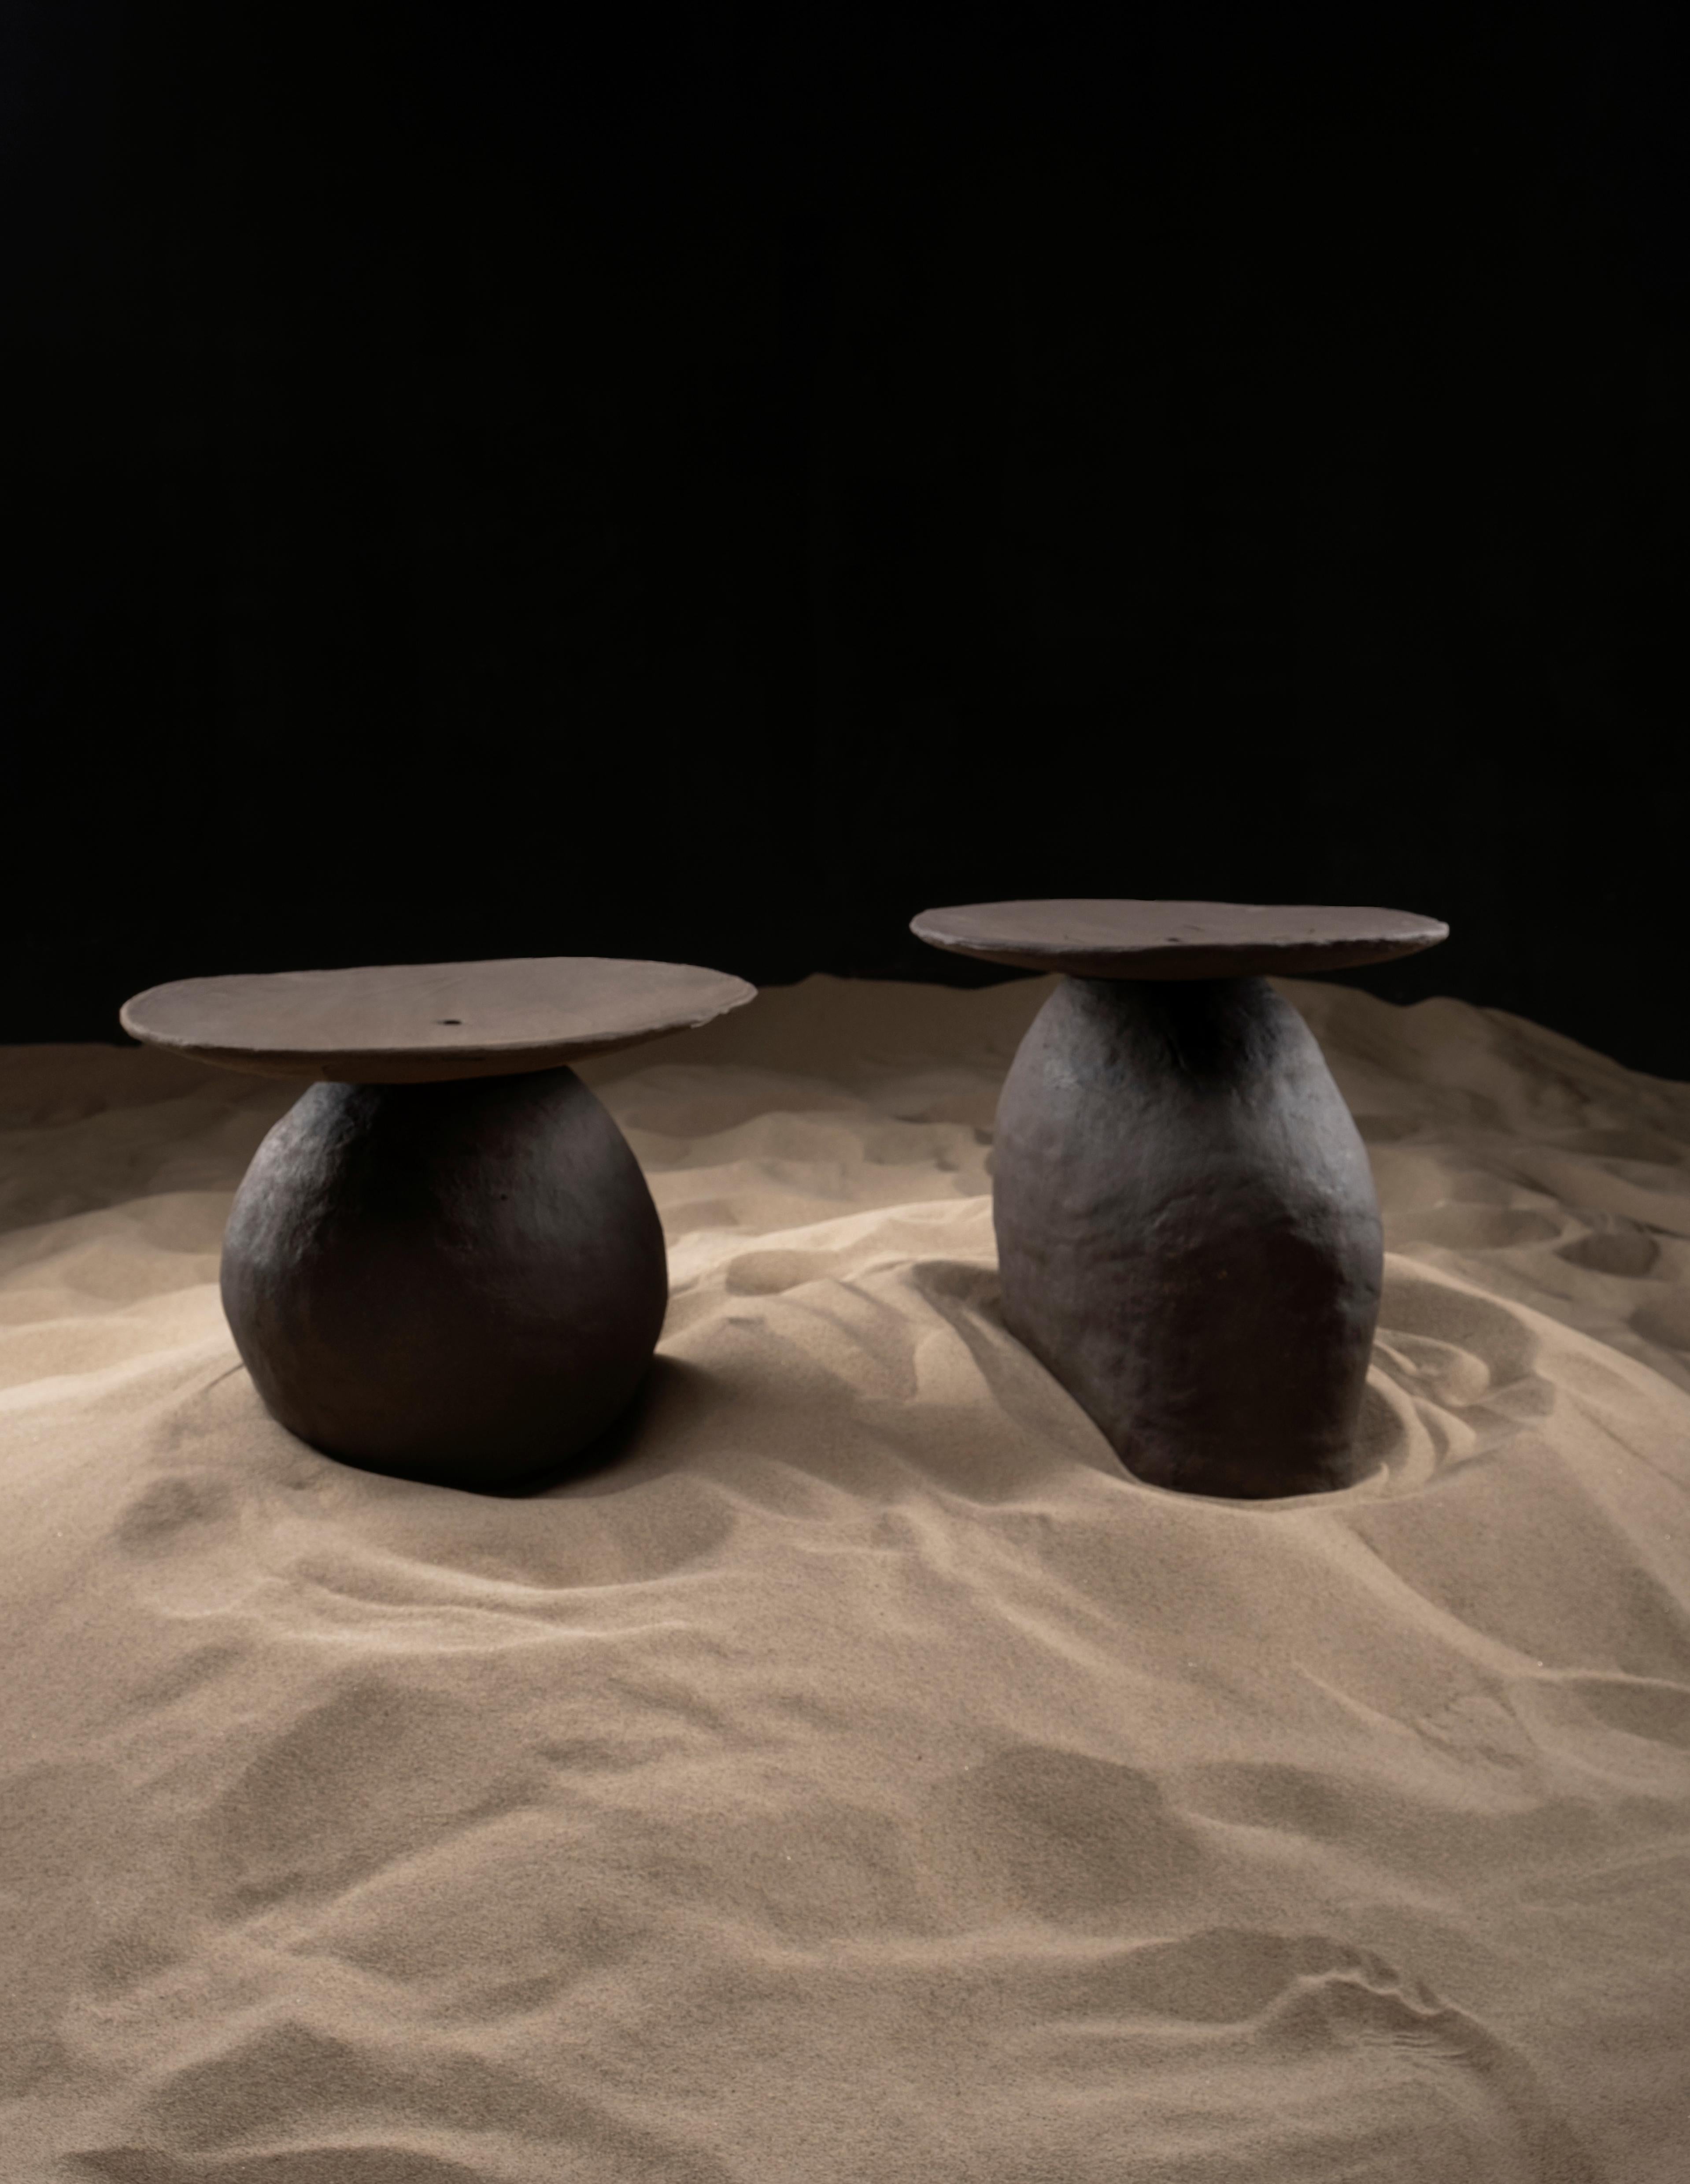 The Senex coffee table is set of two pieces of ceramic sculptural furniture. Senex is created by the investigation of ancient forms were shaped by Homo Habilis during human evolution. With the designer’s characteristic interpretation several forms